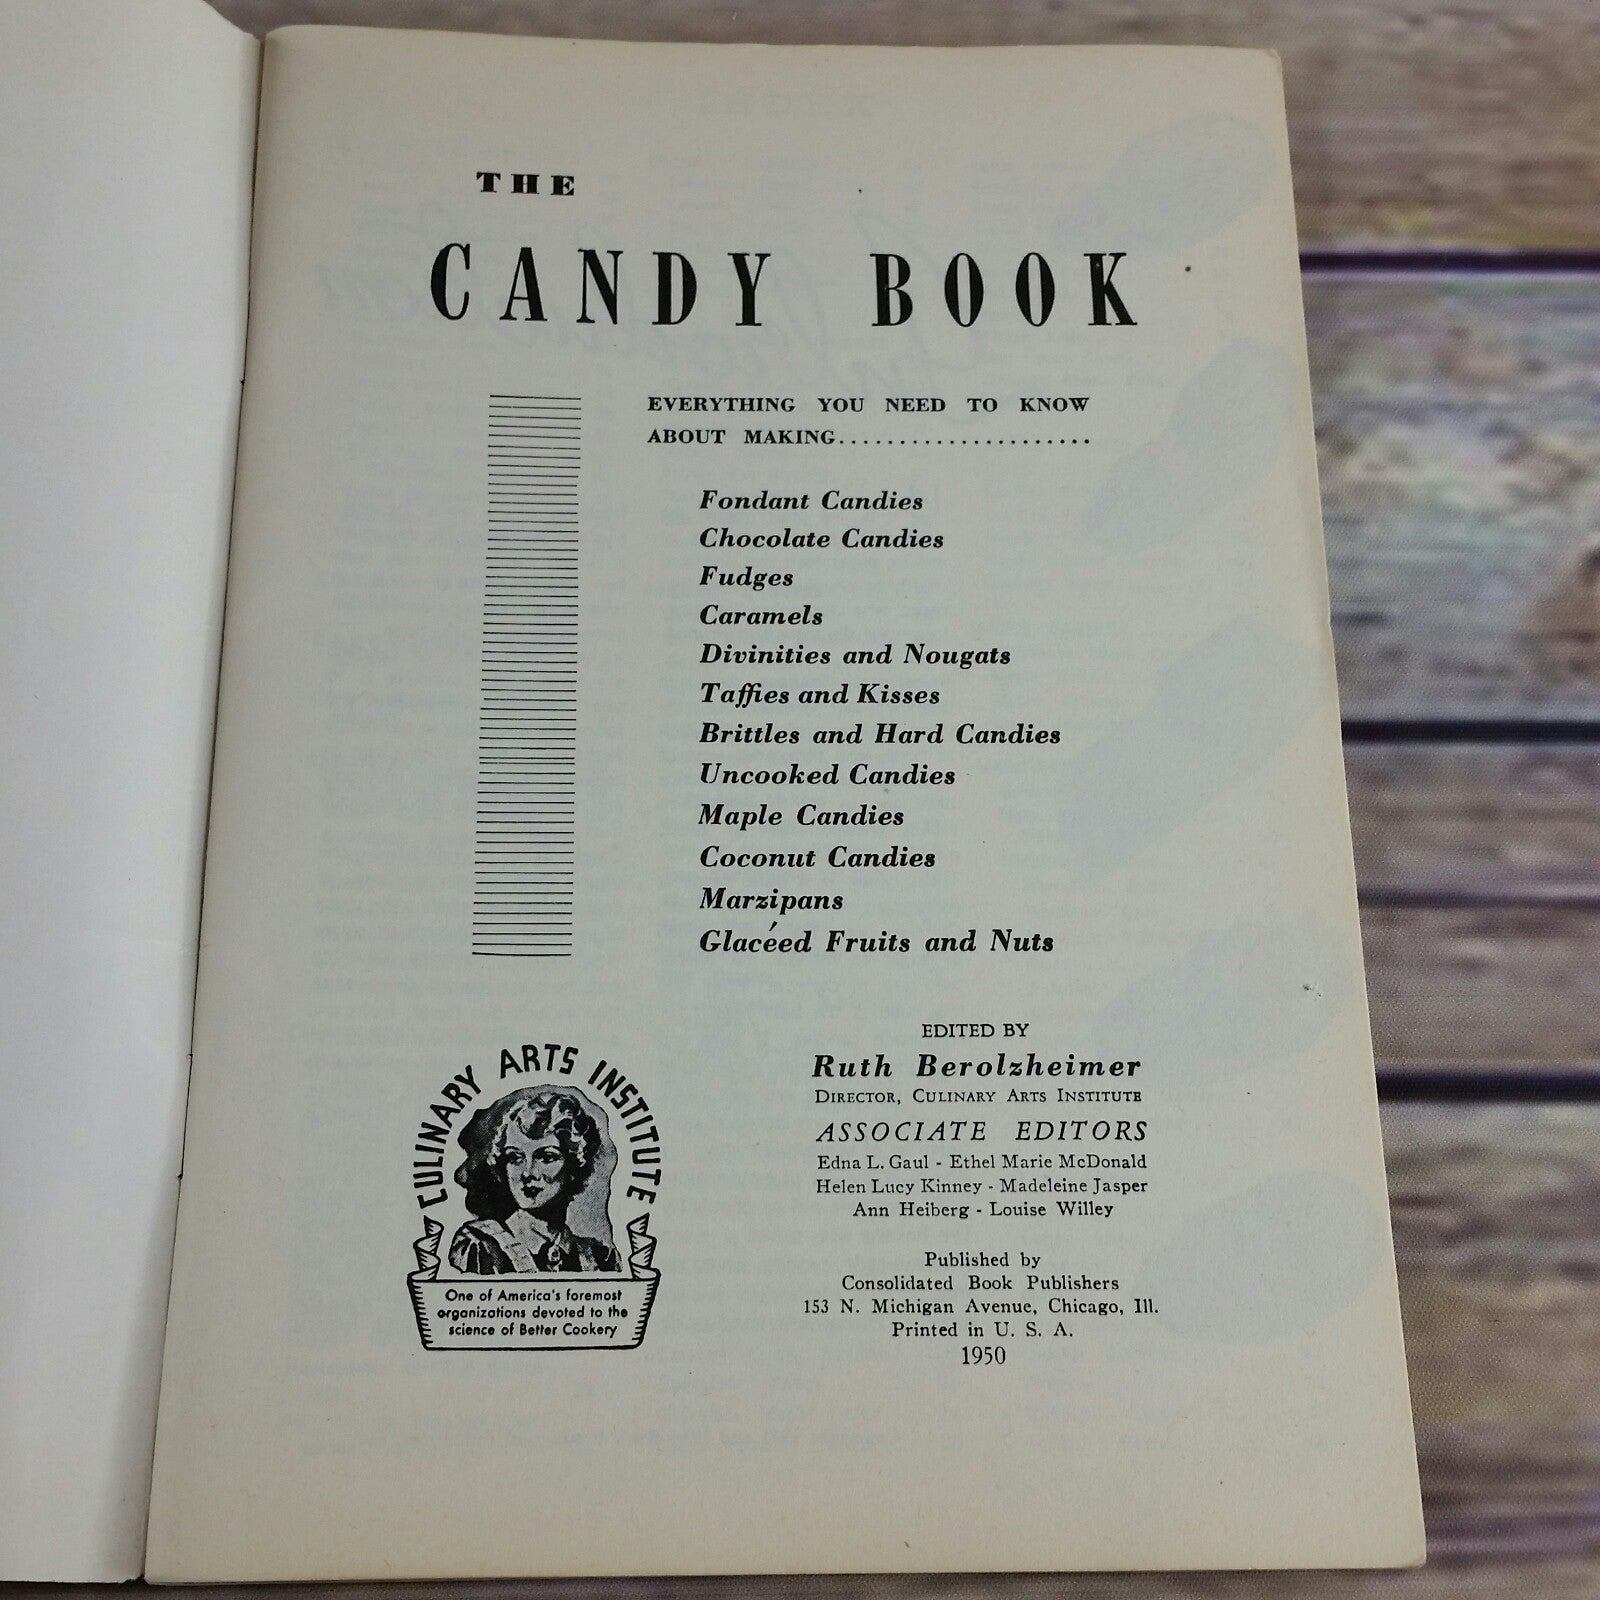 Vintage Candy Cookbook 250 Candy Recipes Culinary Arts Ruth Berolzheimer 1950 Candy Book Paperback Booklet - At Grandma's Table